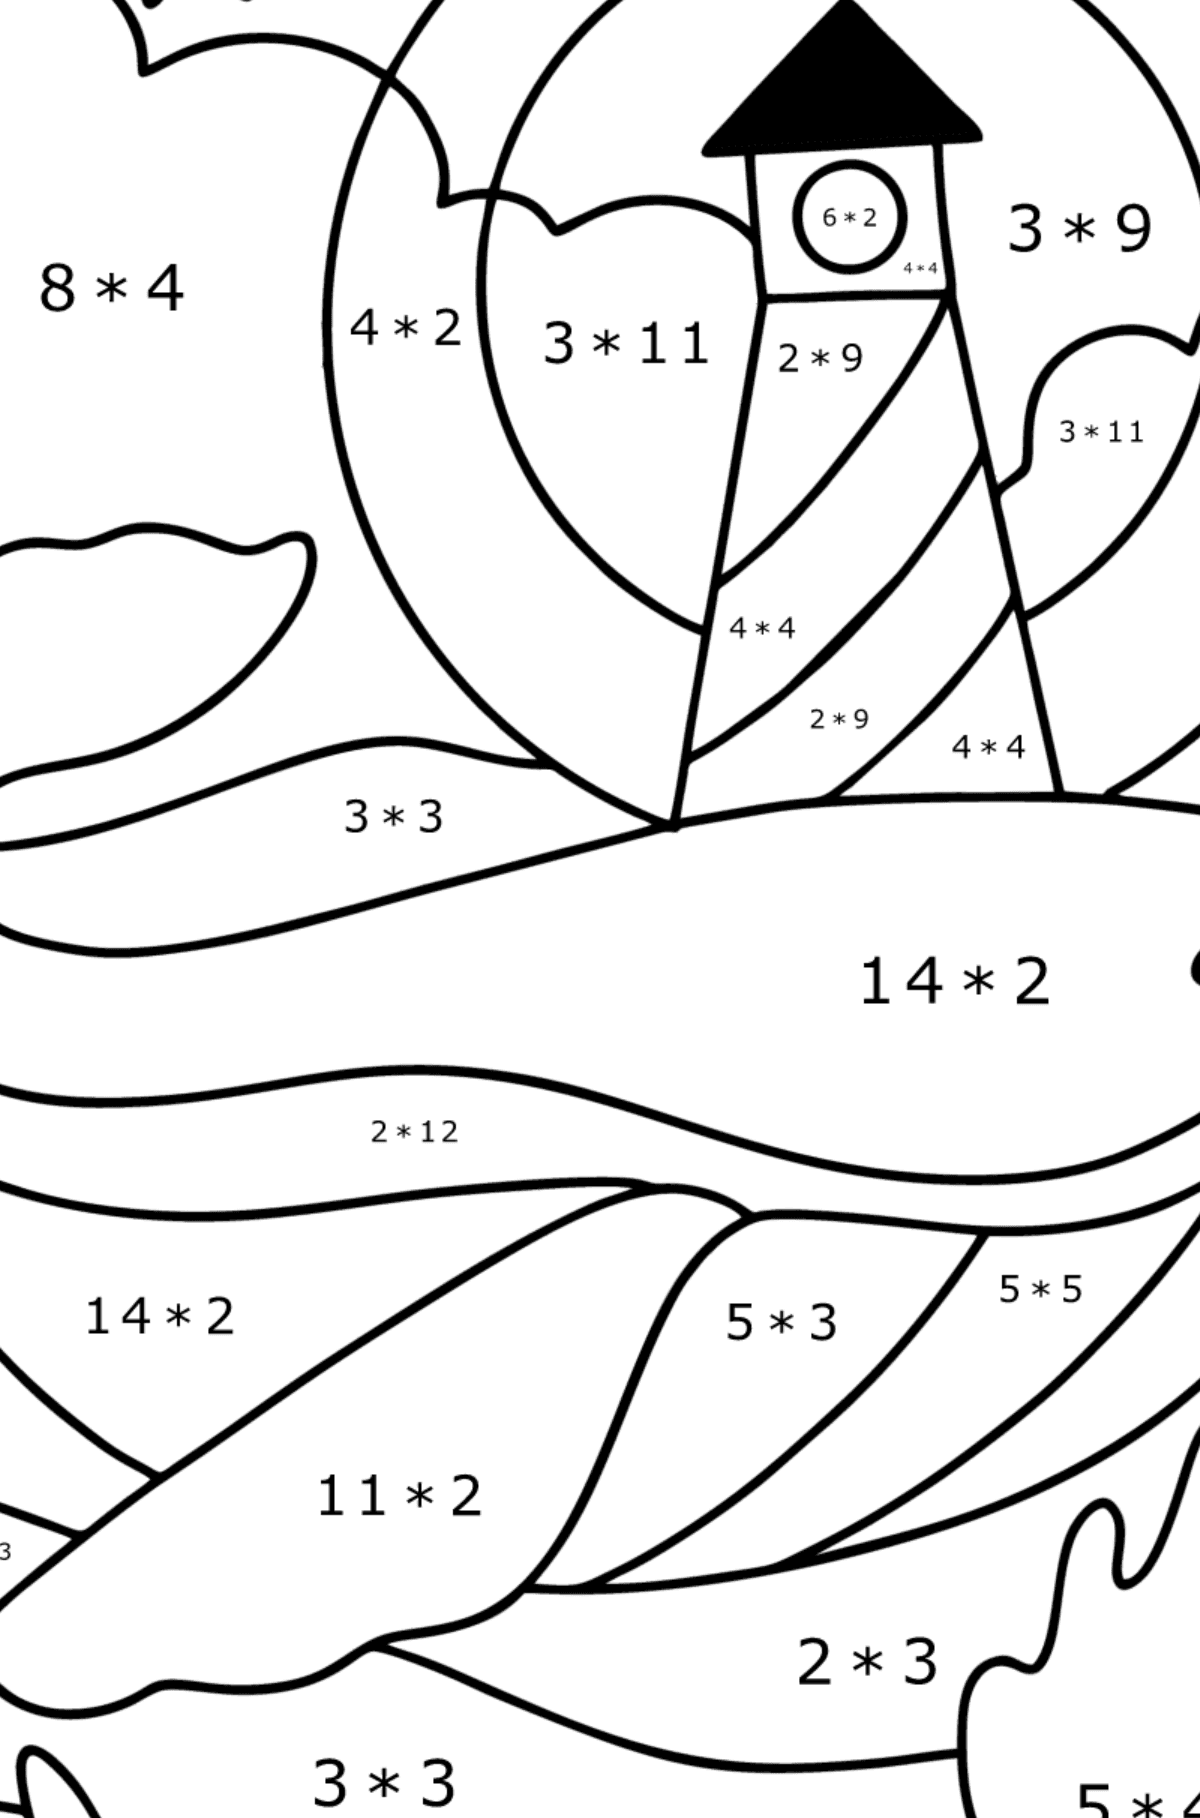 Whale with lighthouse coloring page - Math Coloring - Multiplication for Kids